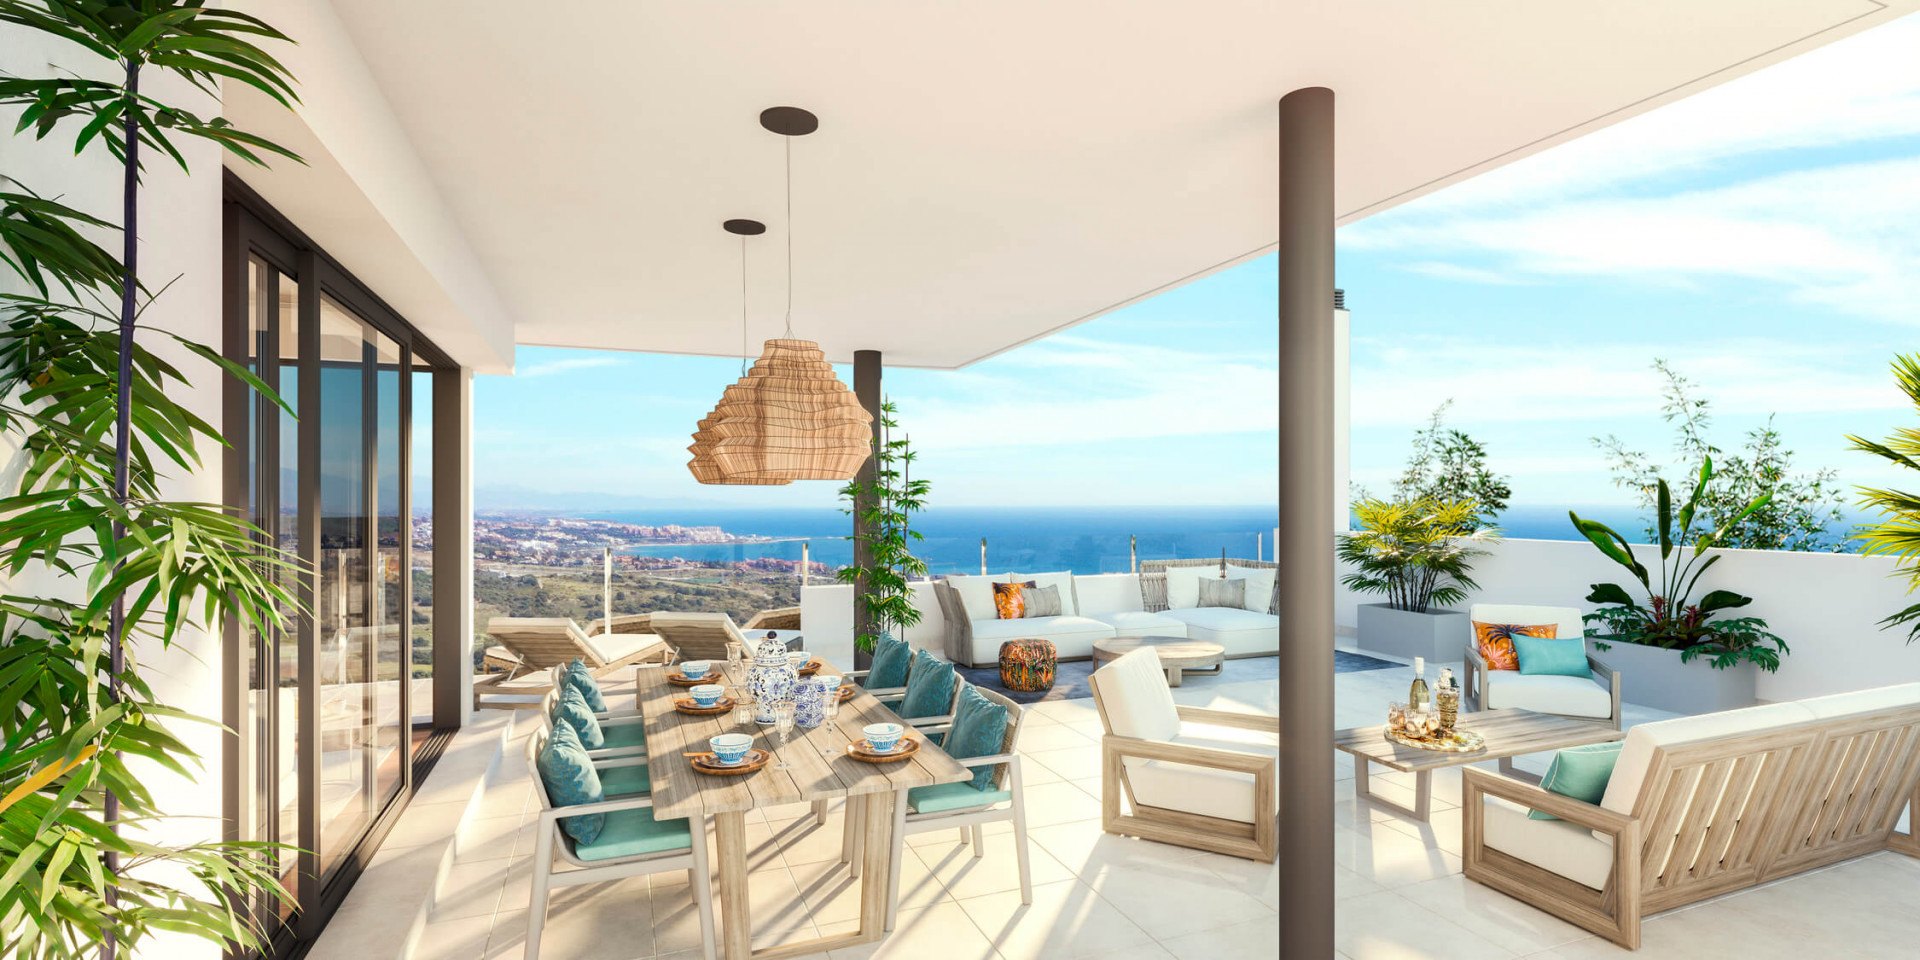 MODERN BRAND NEW QUALITY PENTHOUSE WITH SEA VIEWS IN FINCA CORTESIN - CASARES